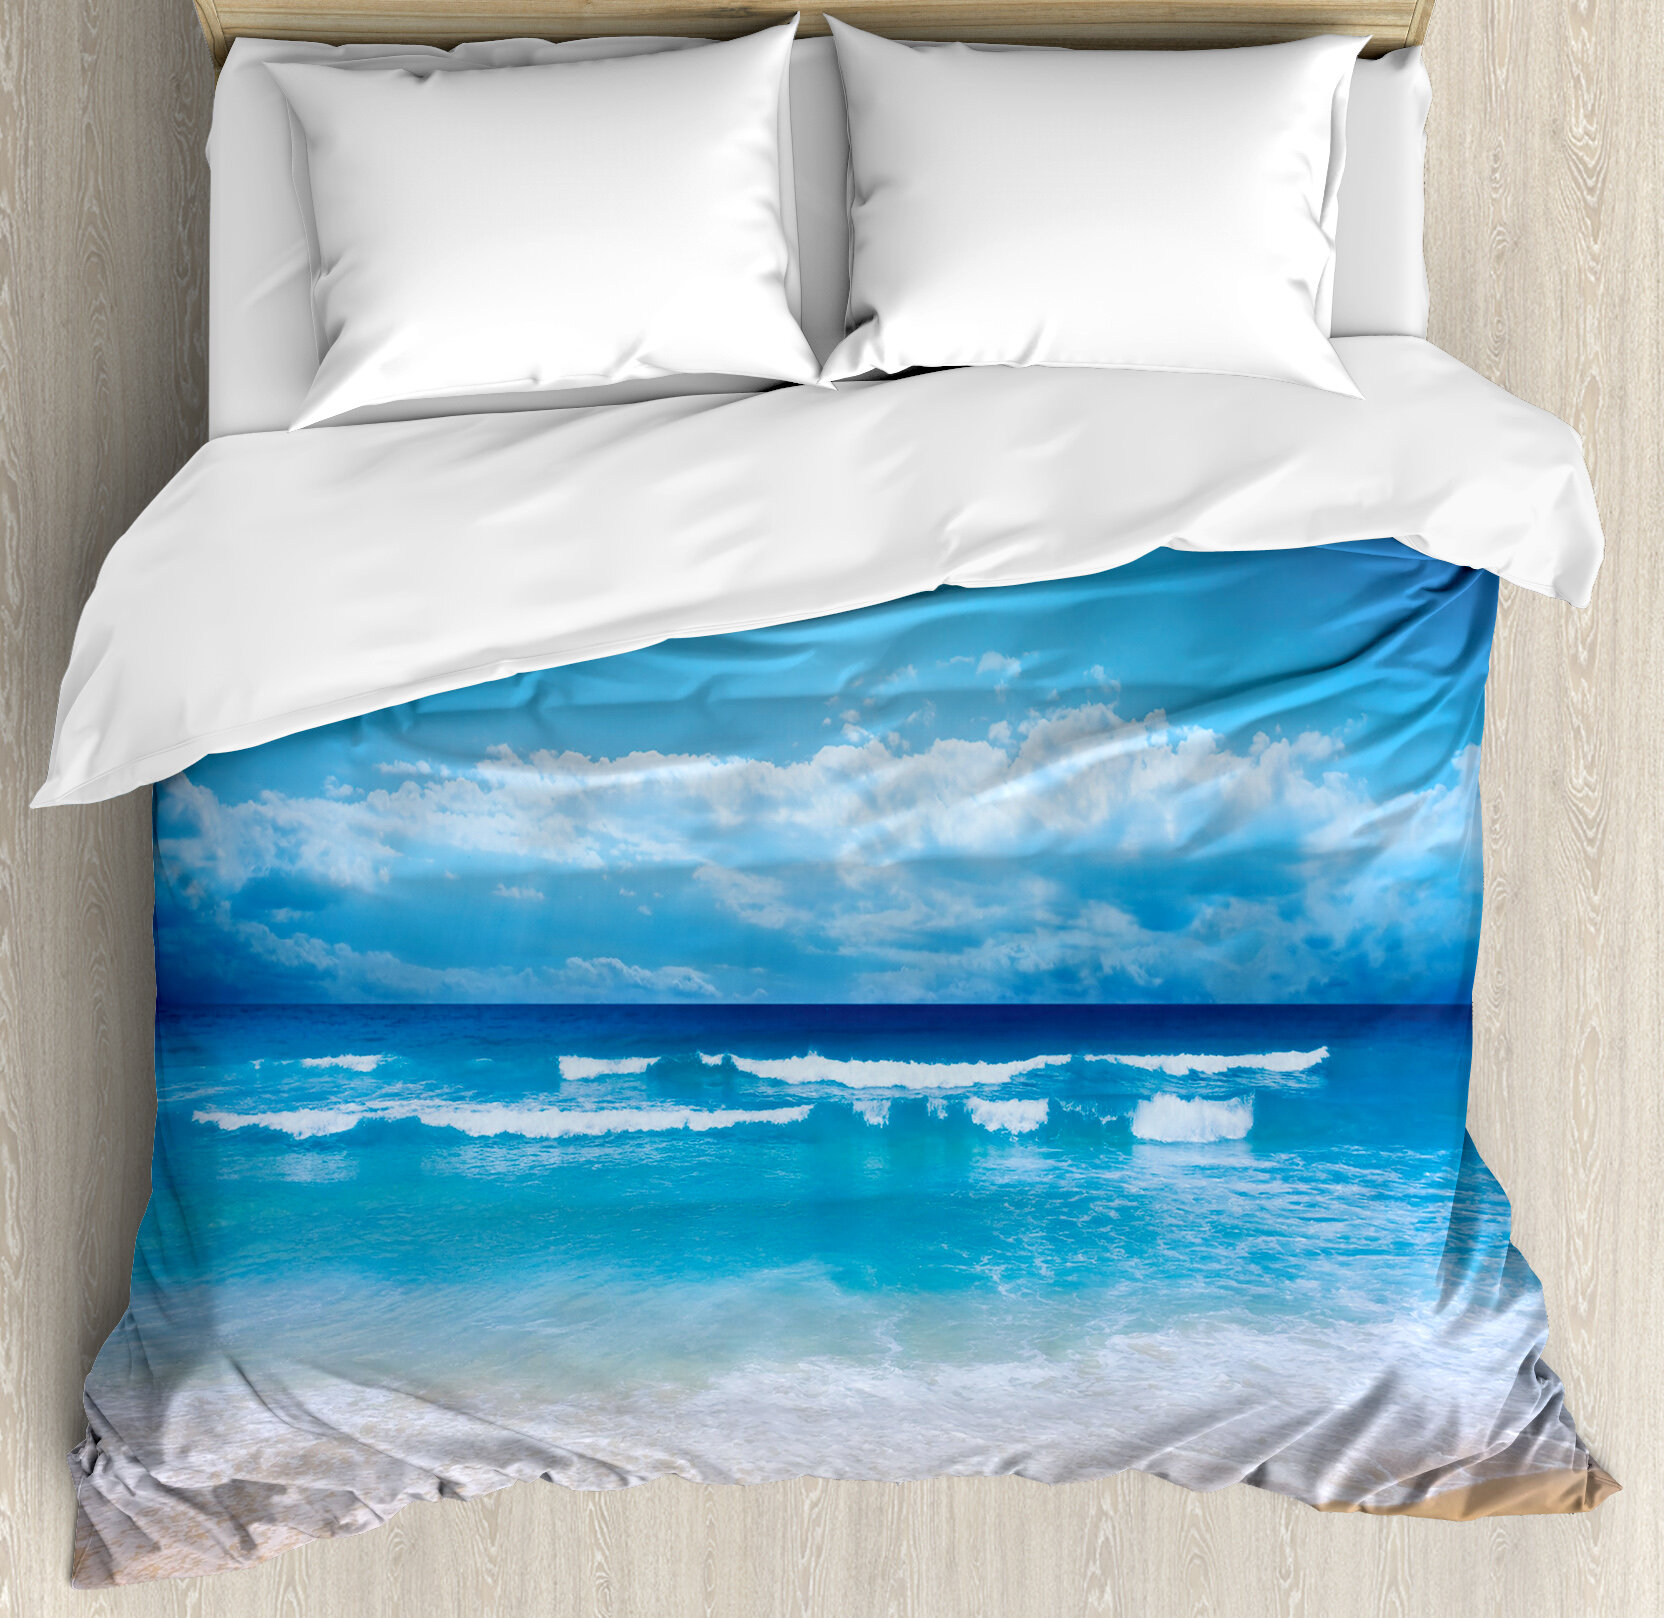 East Urban Home Seascape Theme Landscape Of The Beach And The